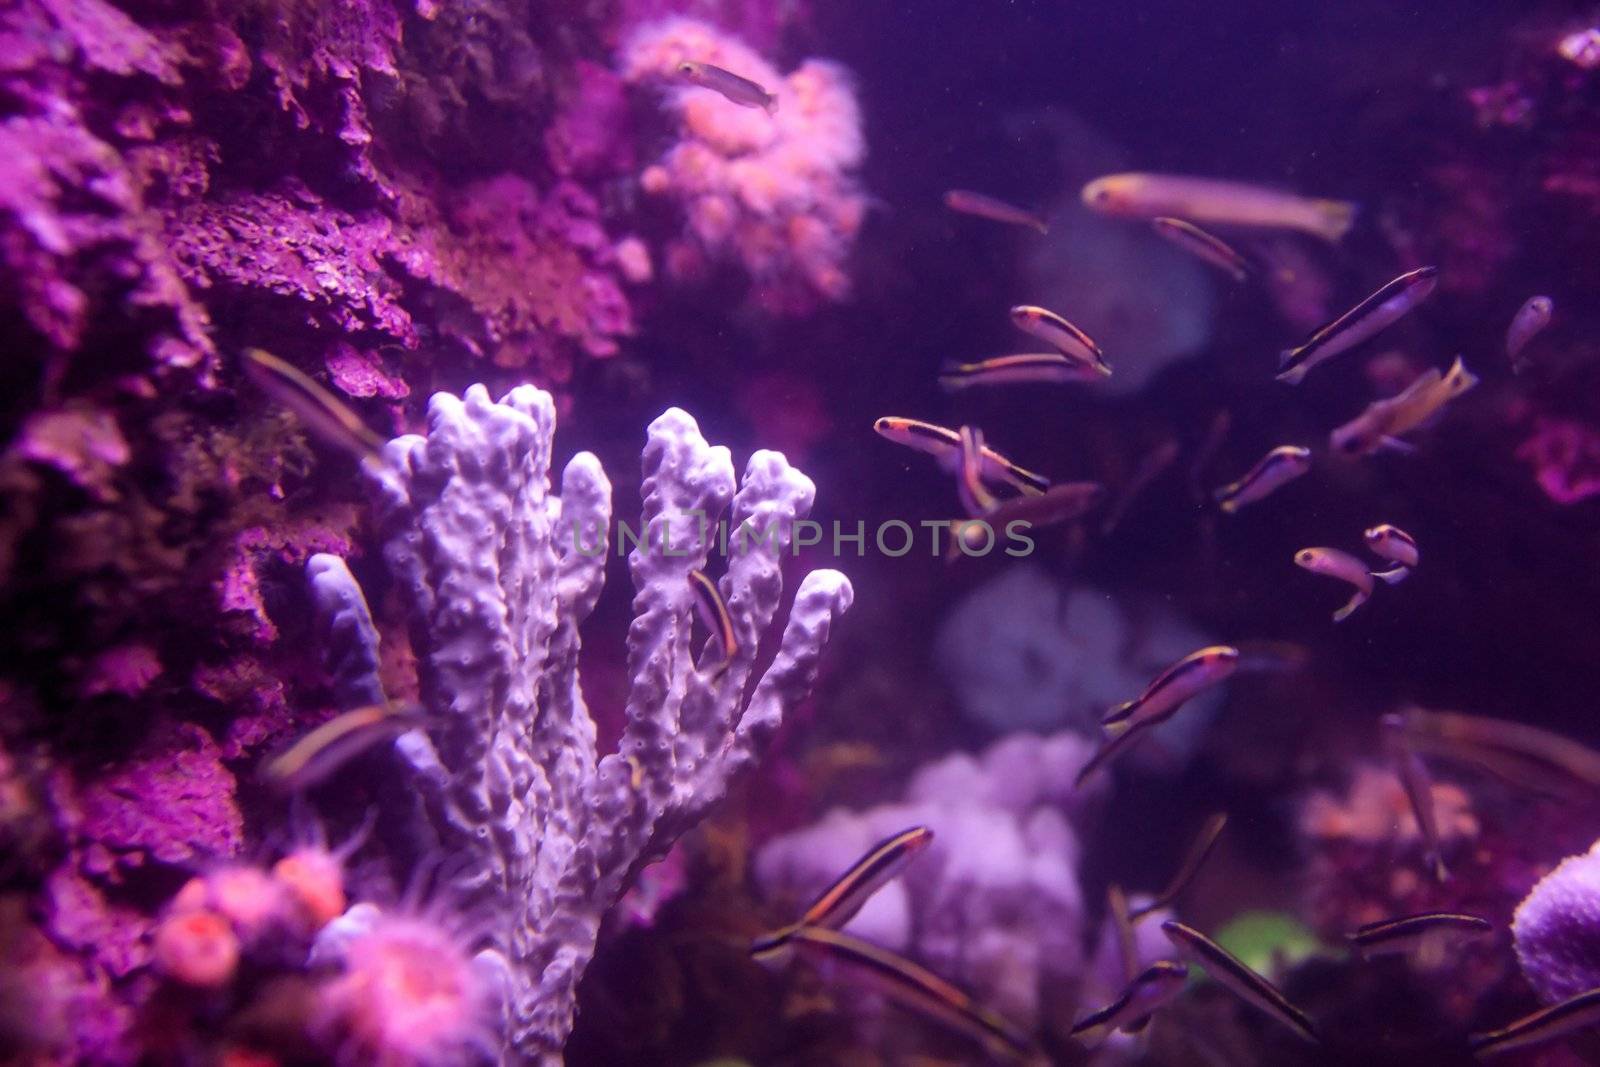 fishes coral and anemones in the bottom of aquarium or sea